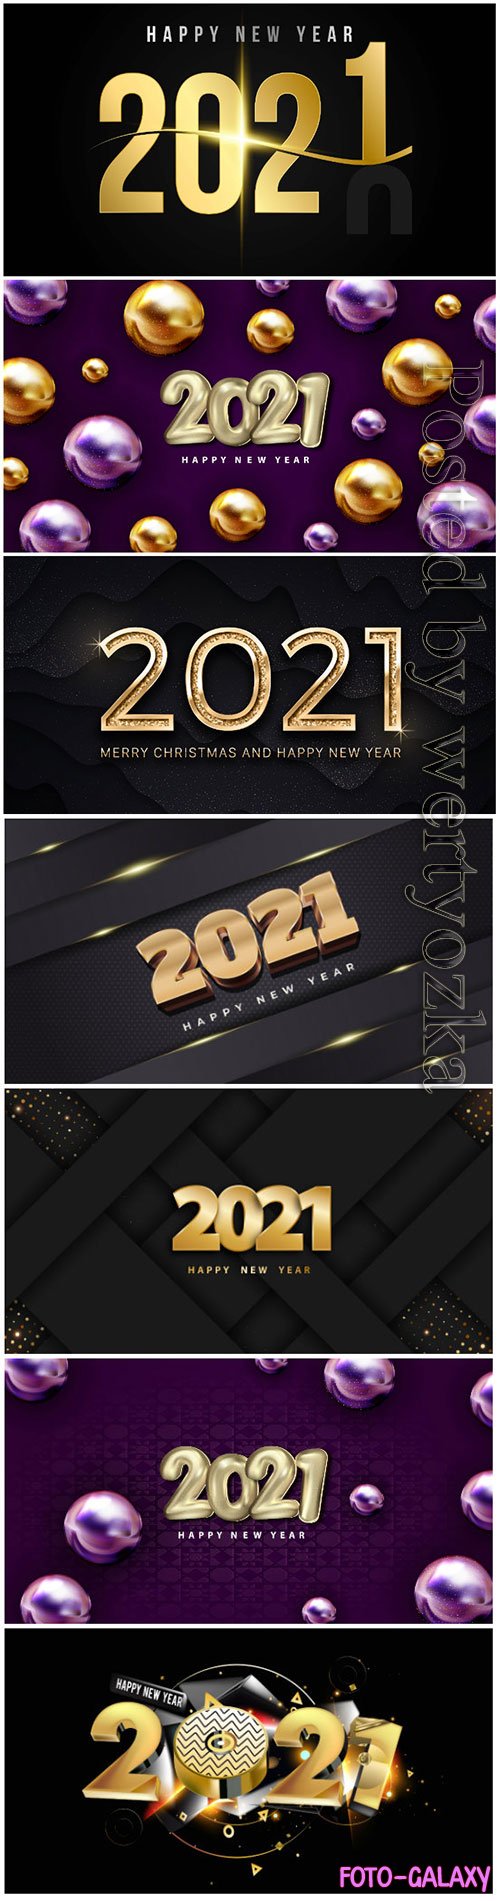 Merry christmas and happy new year luxury golden elegant text